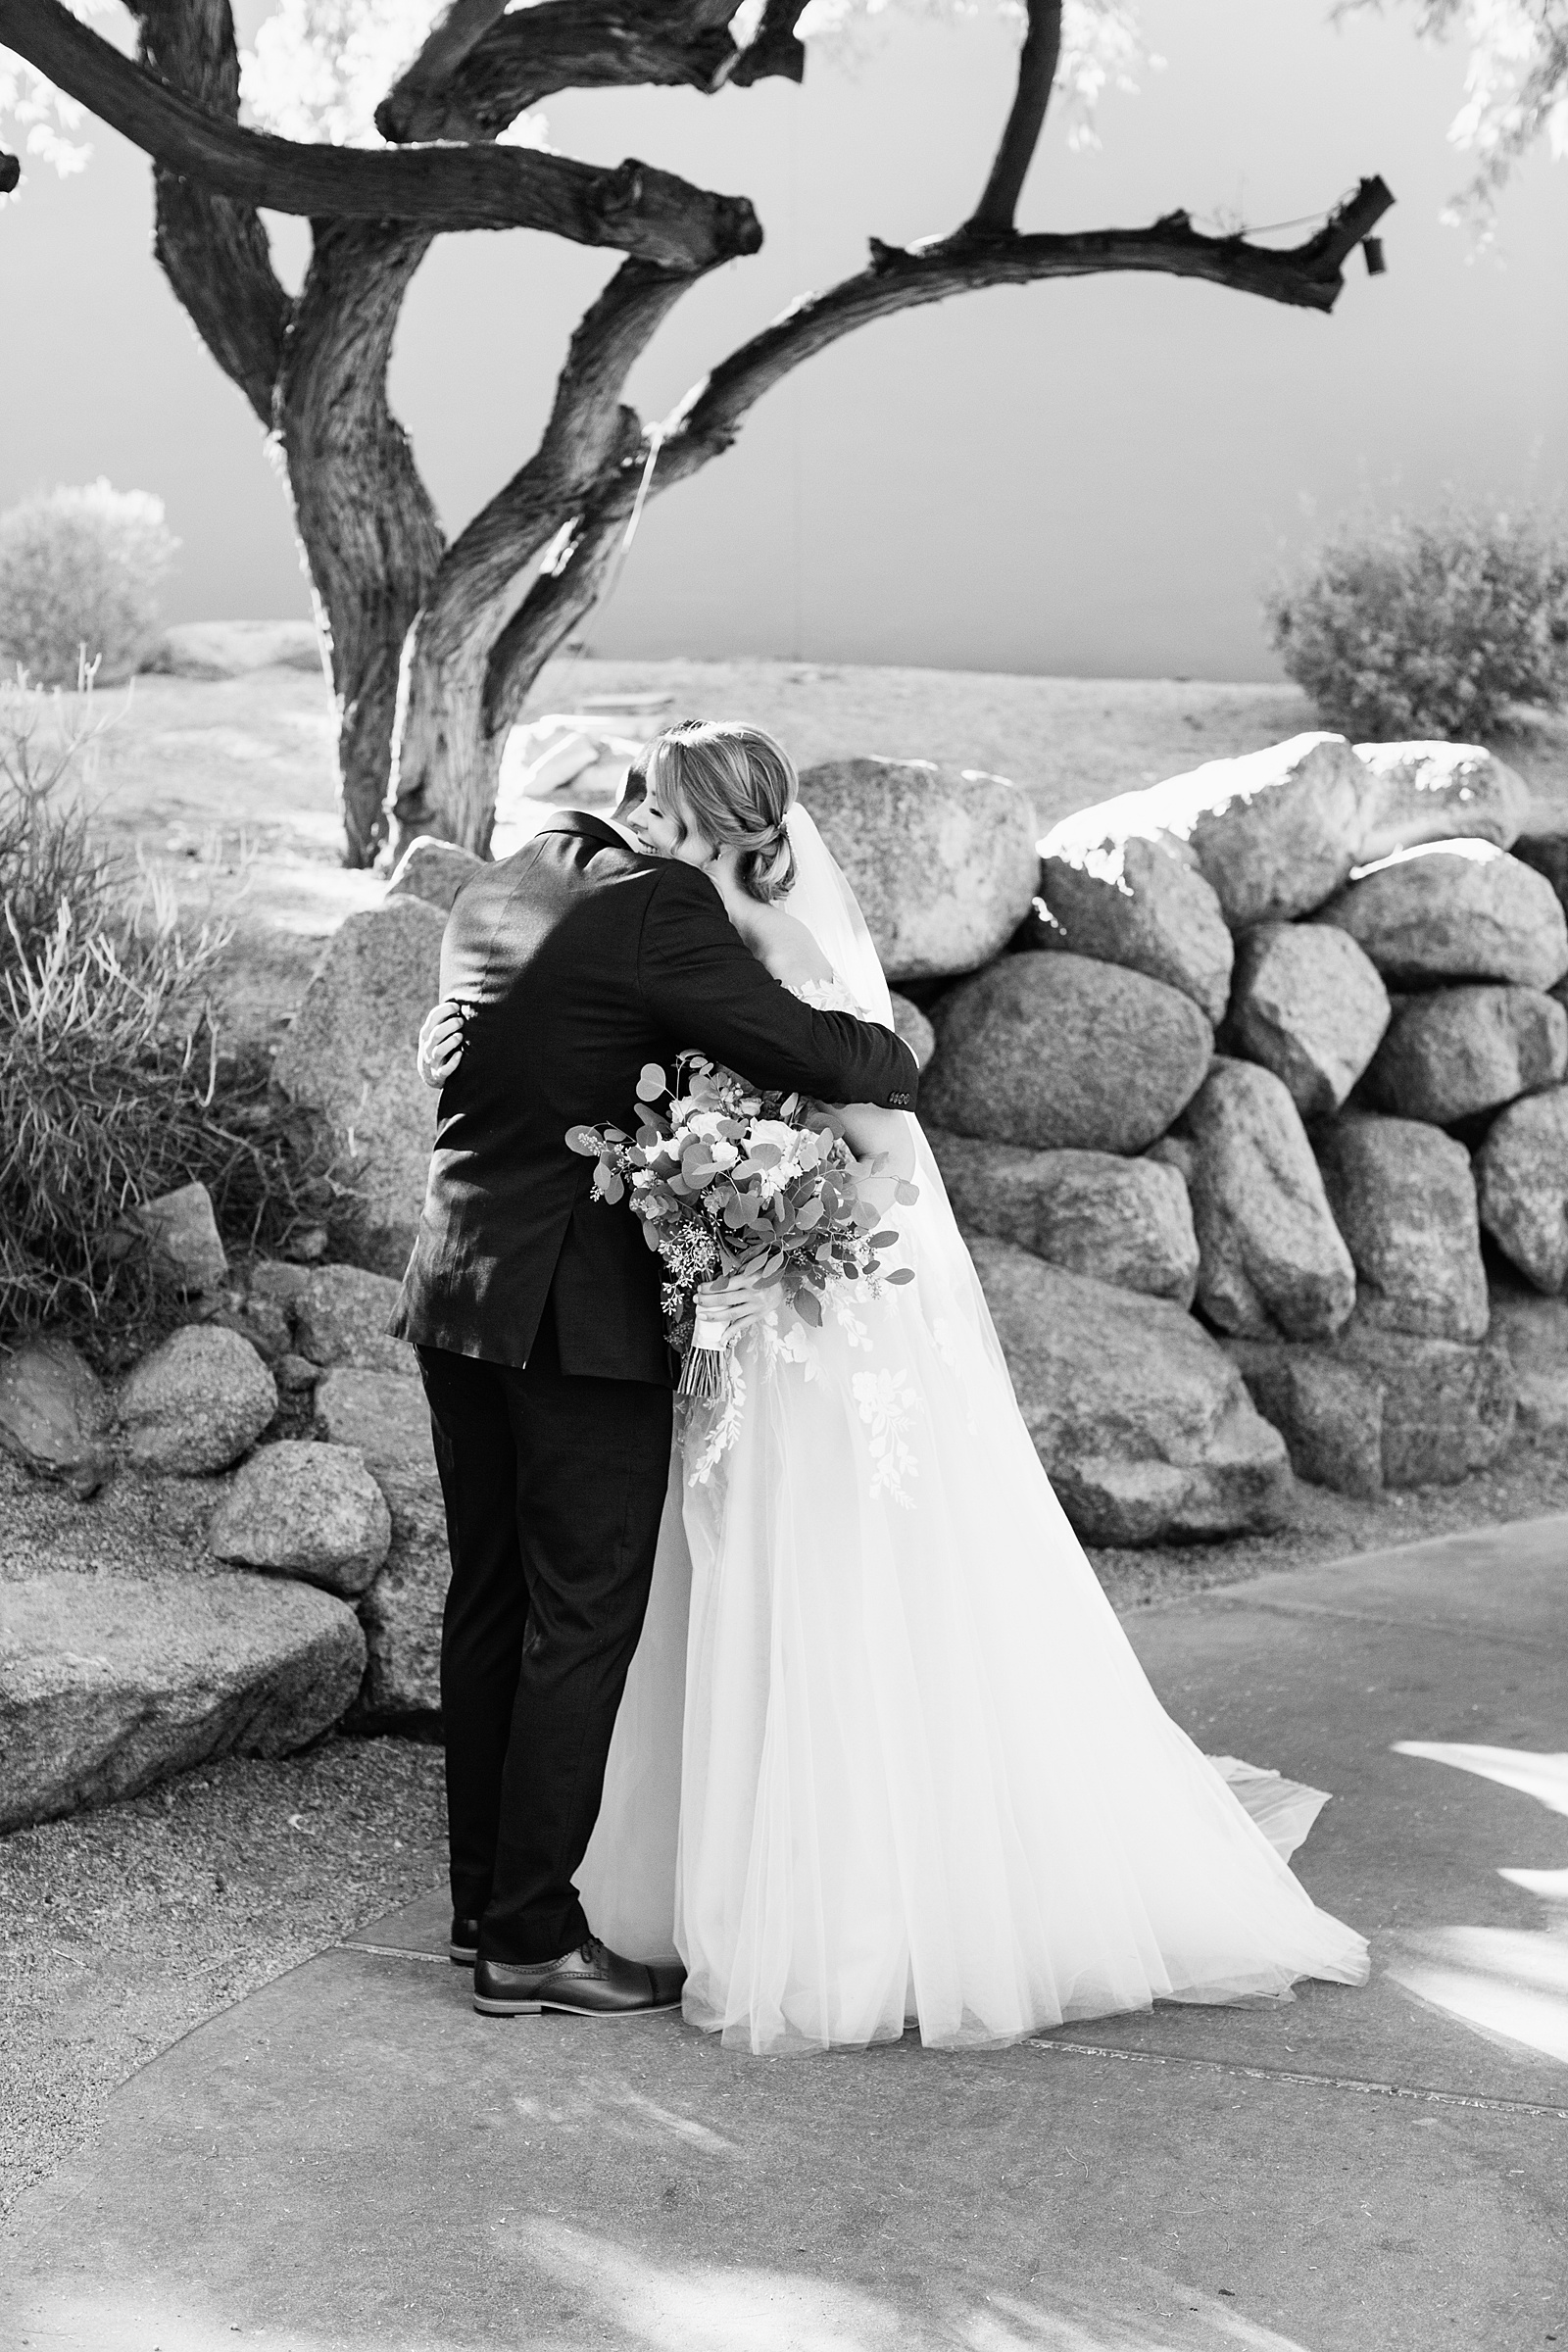 Bride & Groom share an intimate moment during their first look at Sanctuary at Camelback by Phoenix wedding photographer Juniper and Co Photography.